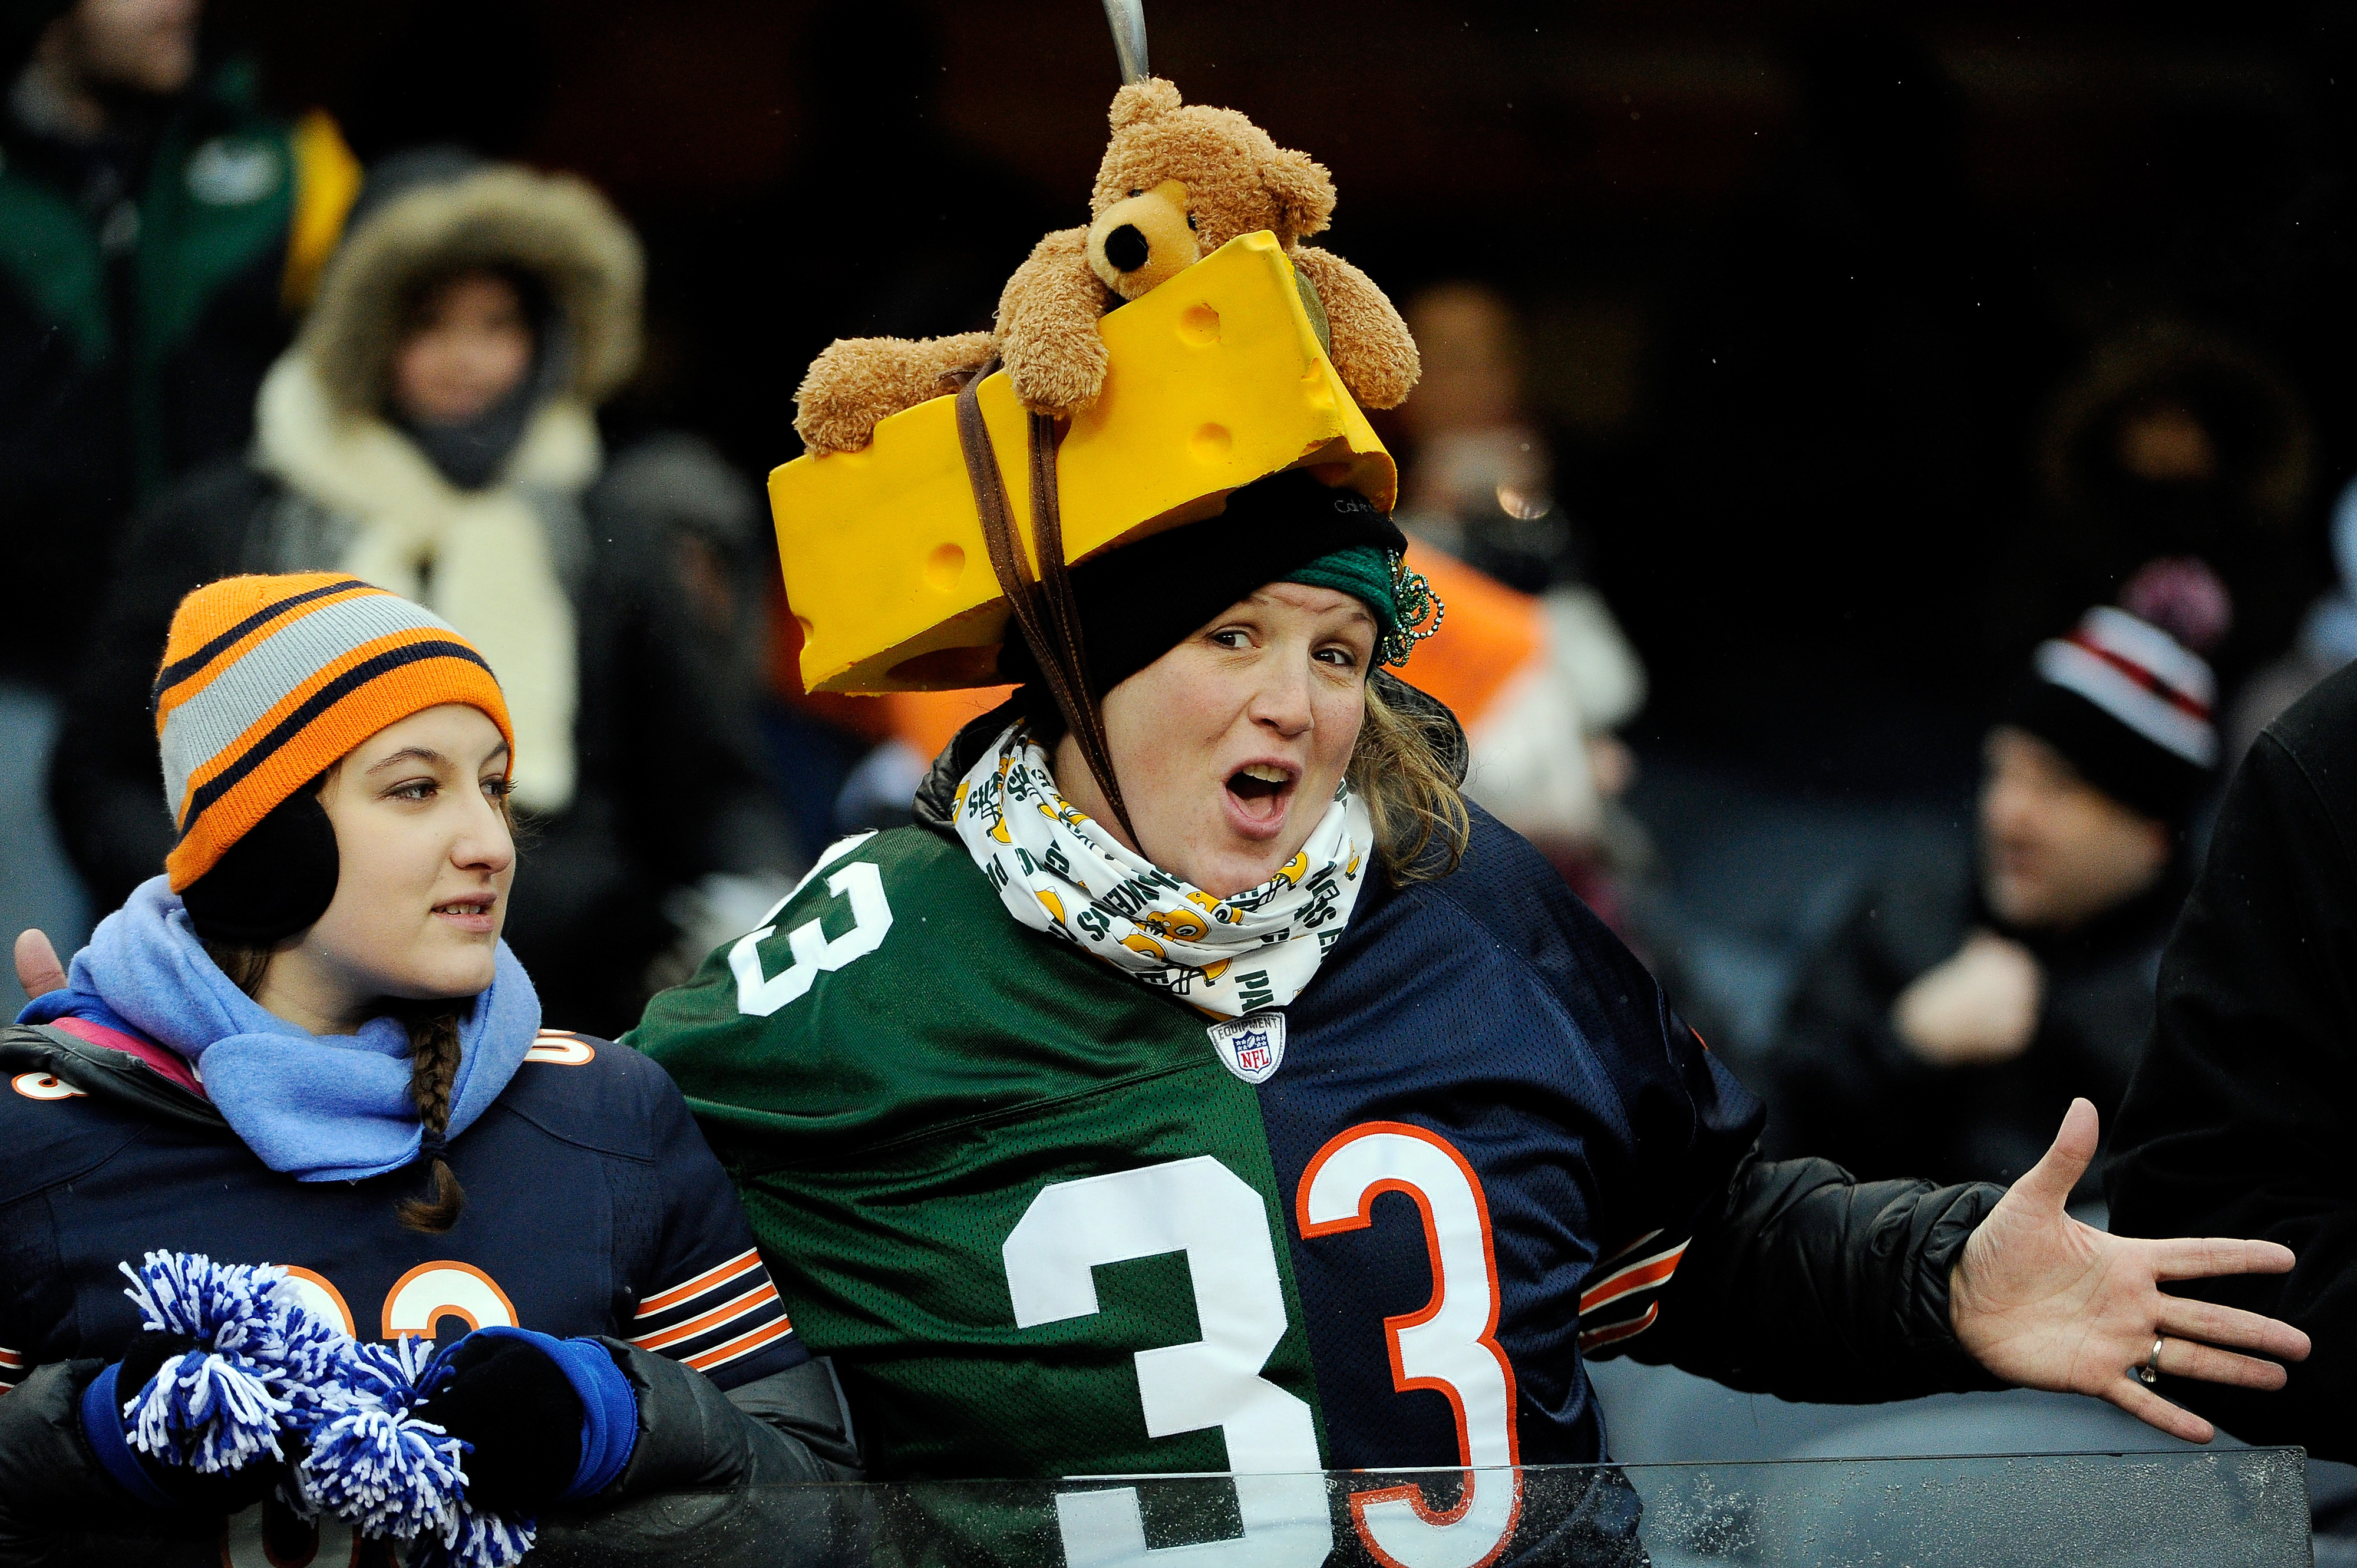 Nike jerseys for Cheap - The Weekend Bears Den: May 17, 2014 - Chicago Bears Rookie ...